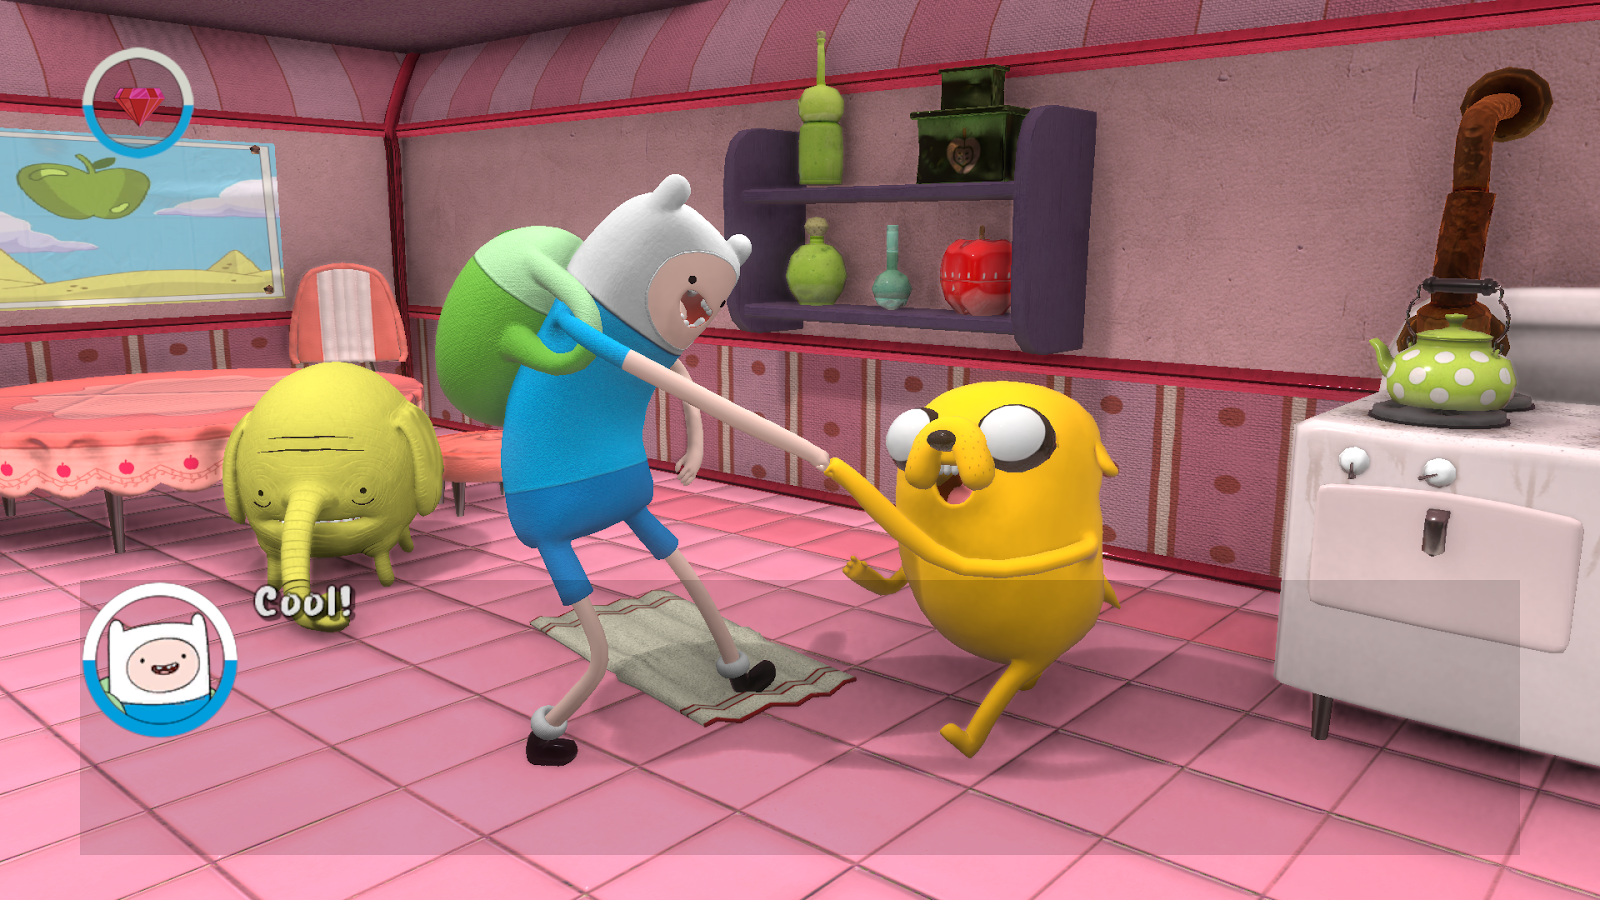 Things To Do In Los Angeles: Adventure Time Time: Stop Motion Episode Next  Week